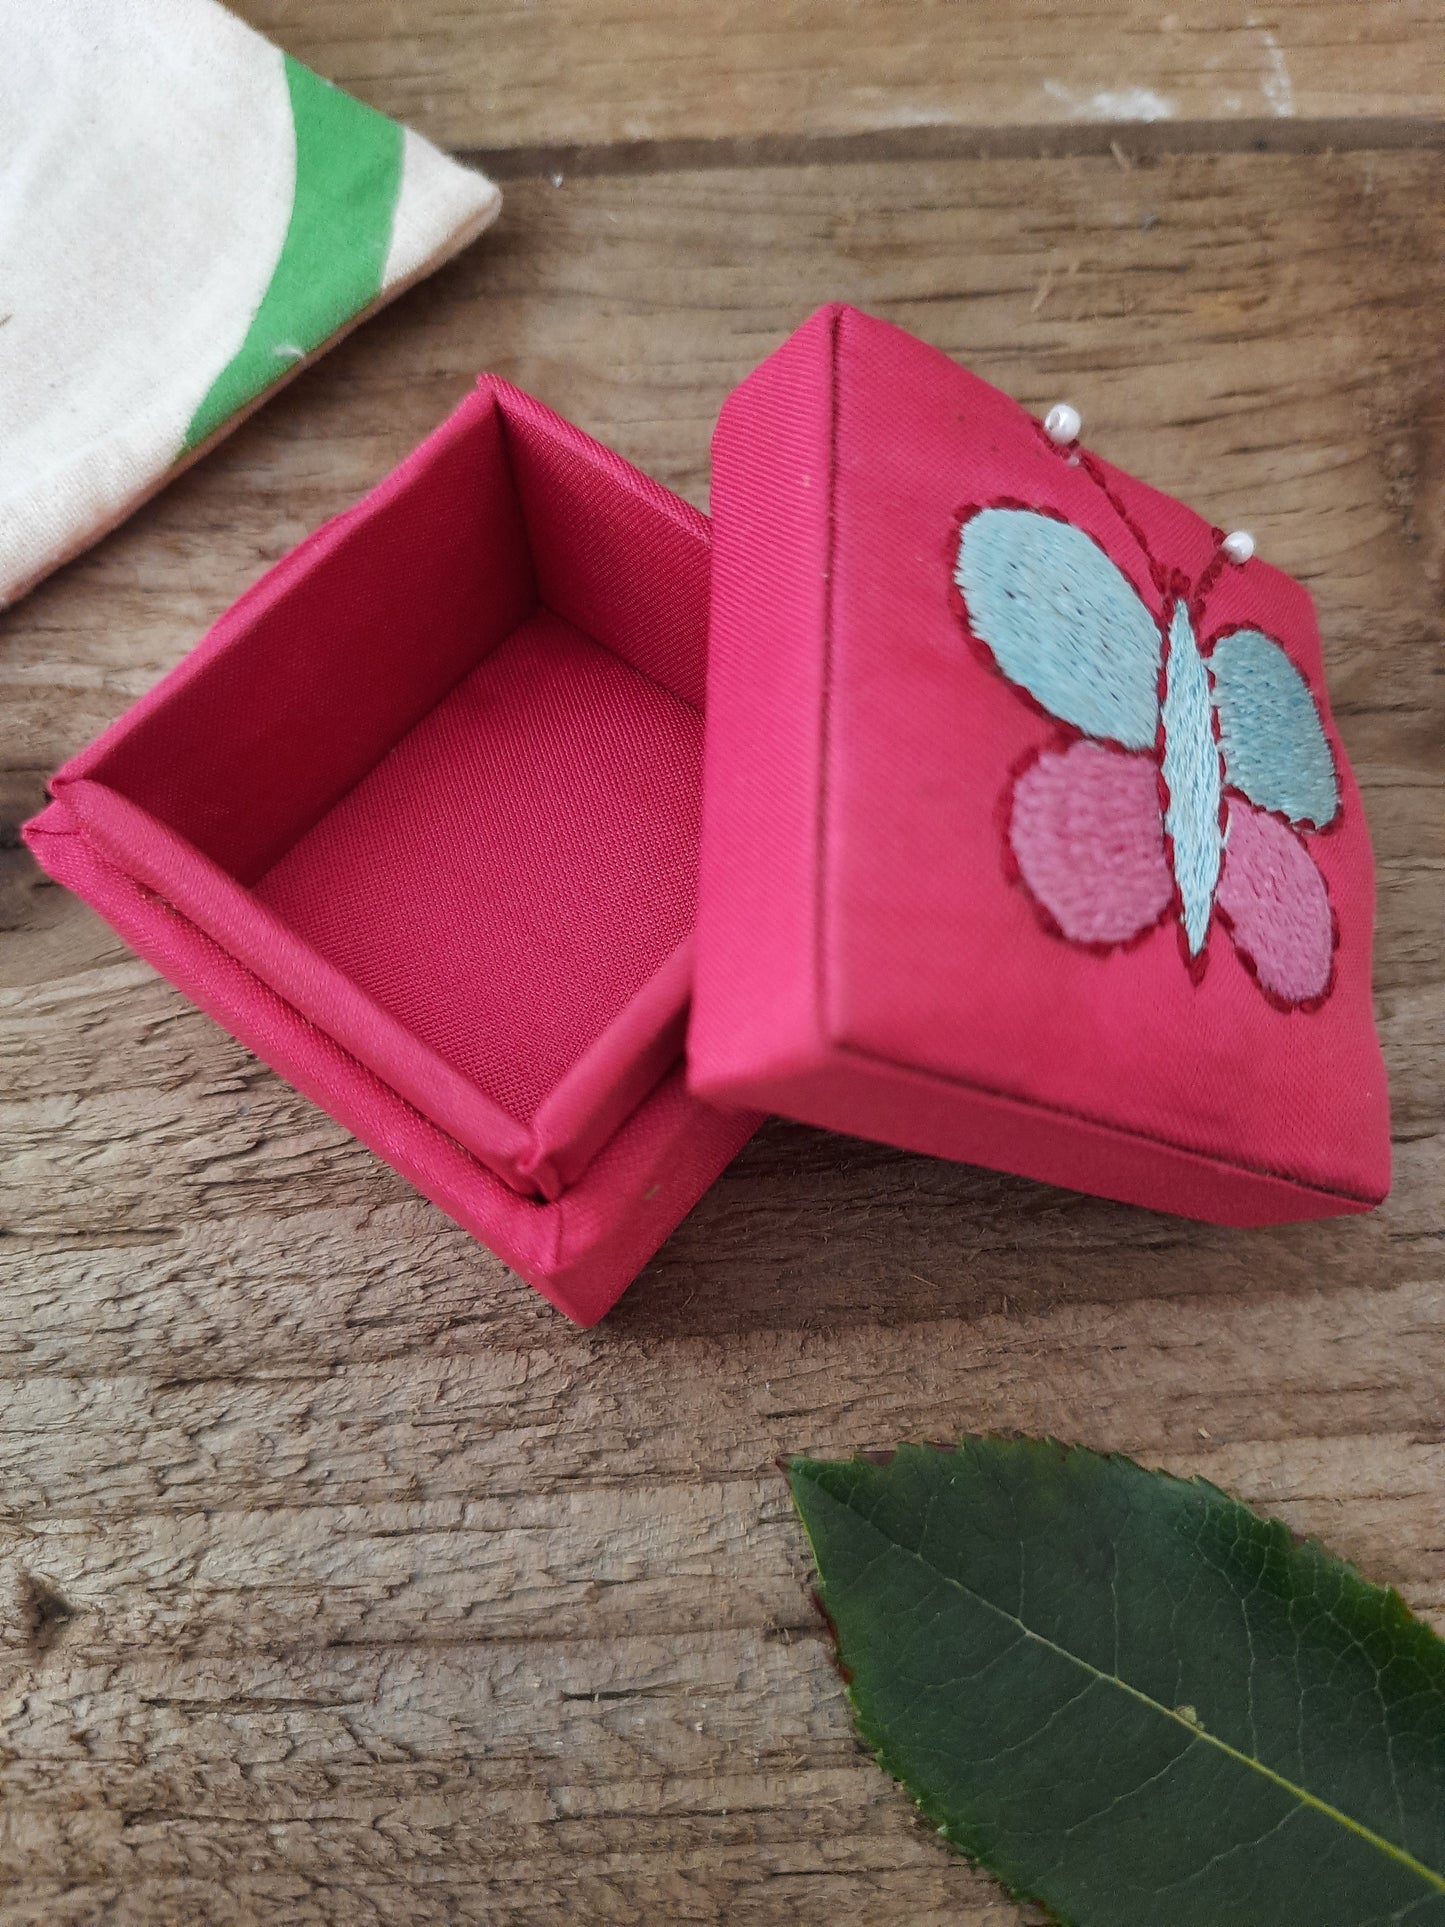 Shop Ethical | Jewellery Box | Small Butterfly | Fair Trade Products | Small Jewelry Box